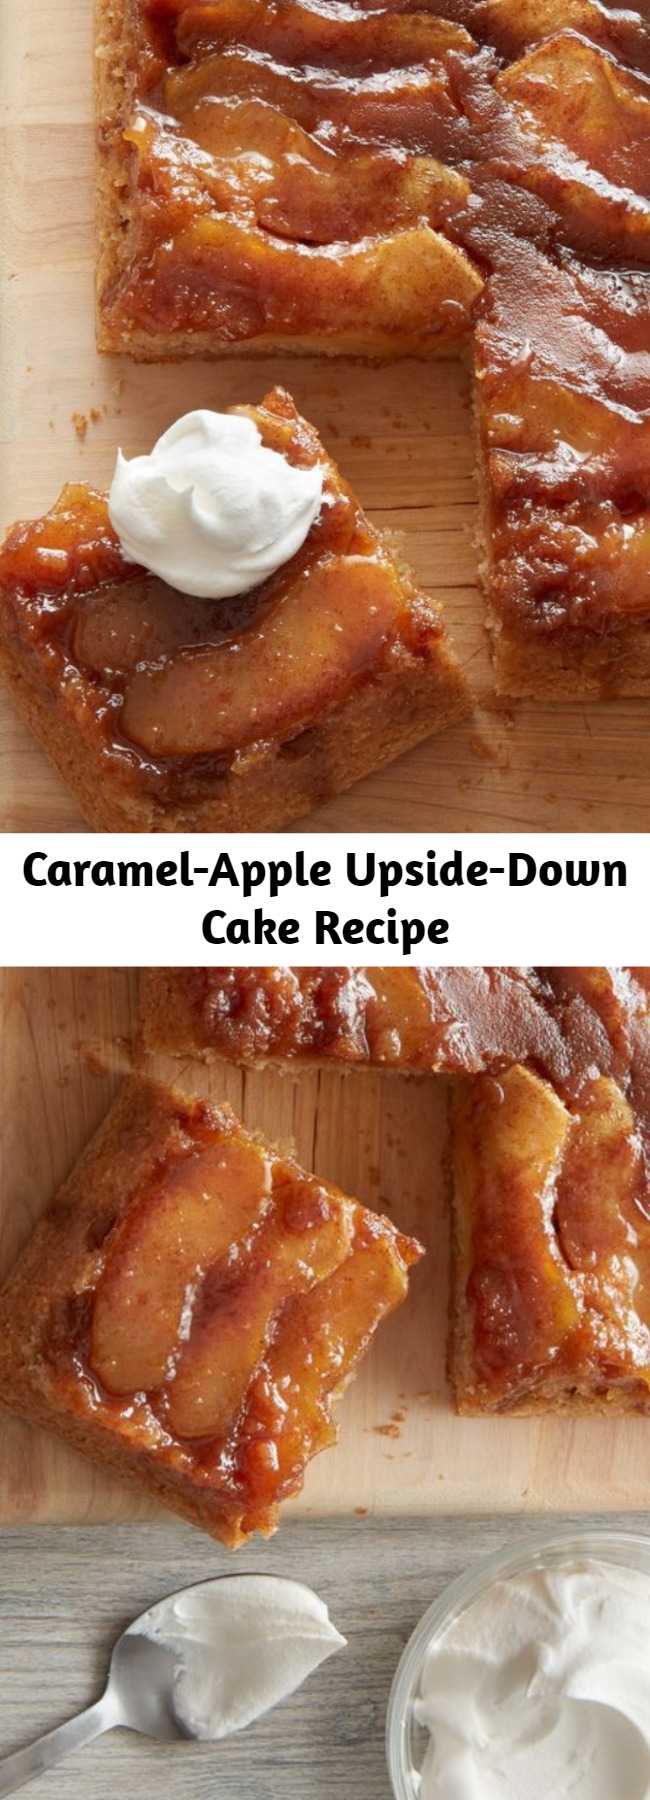 Caramel-Apple Upside-Down Cake Recipe - The best part about the classic pineapple upside-down cake is its gooey fruit topping, and this fresh take on the beloved dessert is no exception. We replaced canned pineapple with fresh apple slices whose tart flavor is the perfect balance to a sticky-sweet caramel sauce. We don't like to play favorites, but this topping plus a tender vanilla scratch cake equals an easy modern-day treat that may just outdo the original.